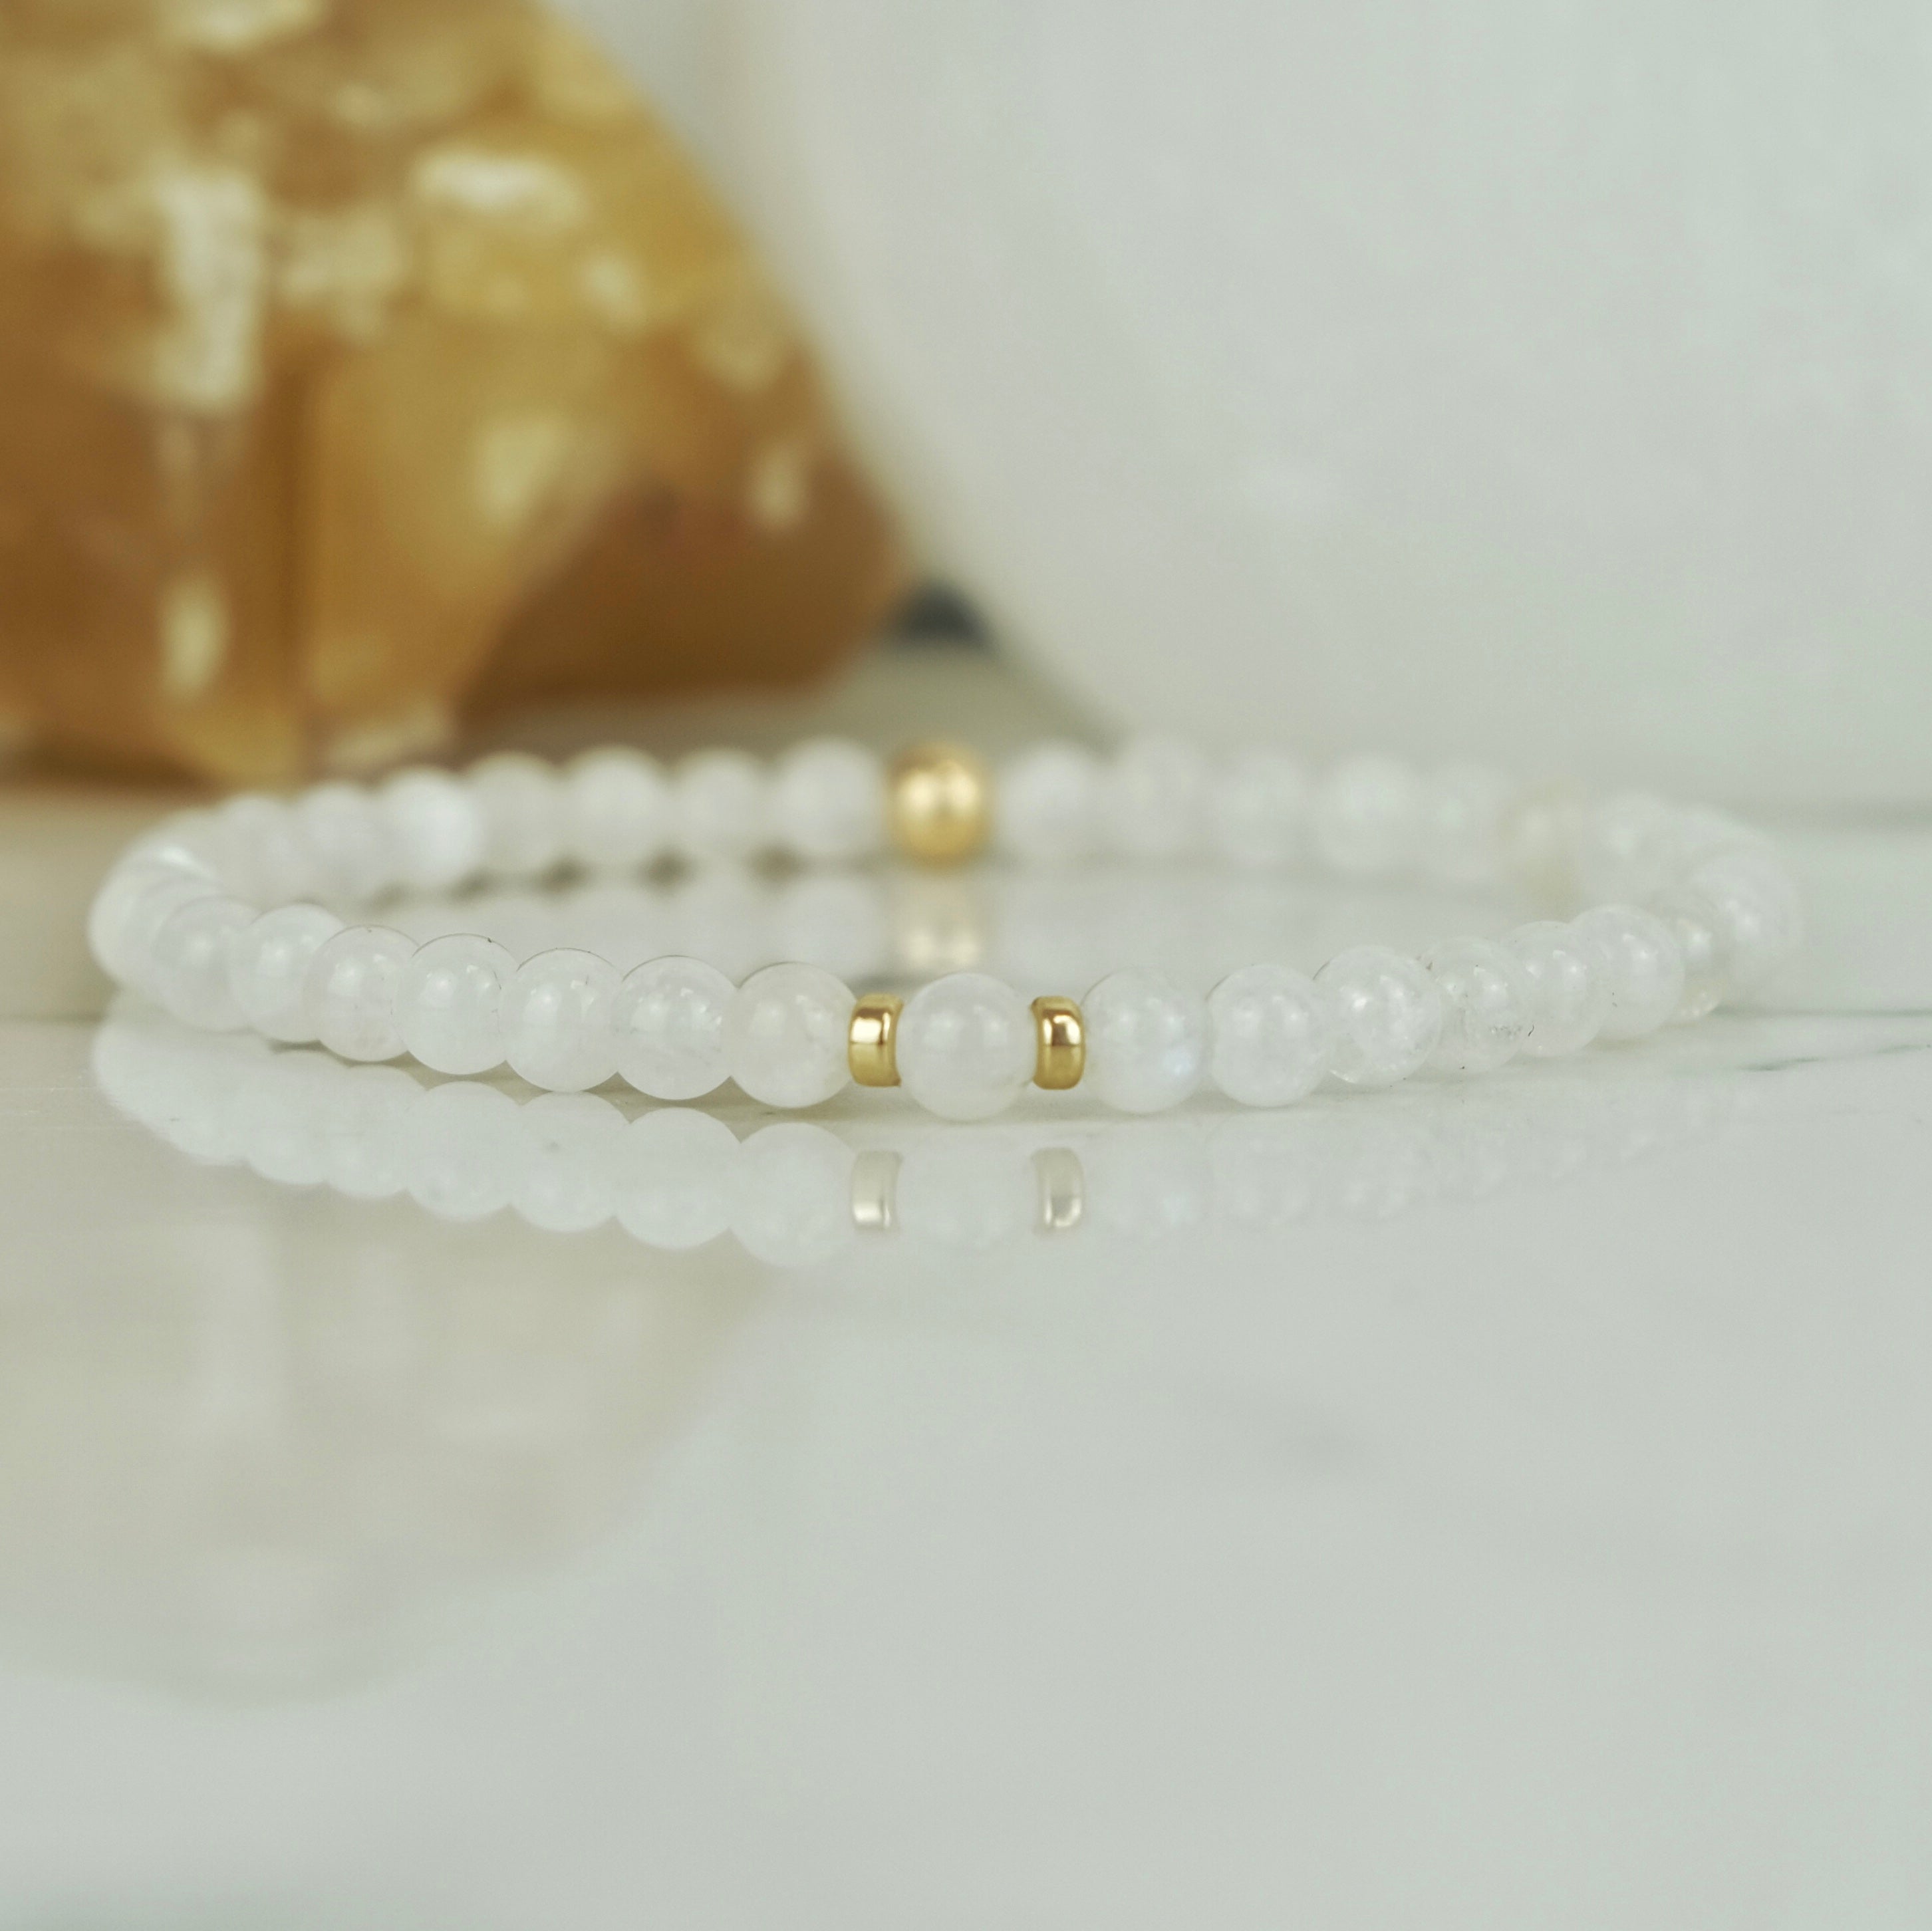 A moonstone gemstone bracelet in 4mm beads with gold filled accessories